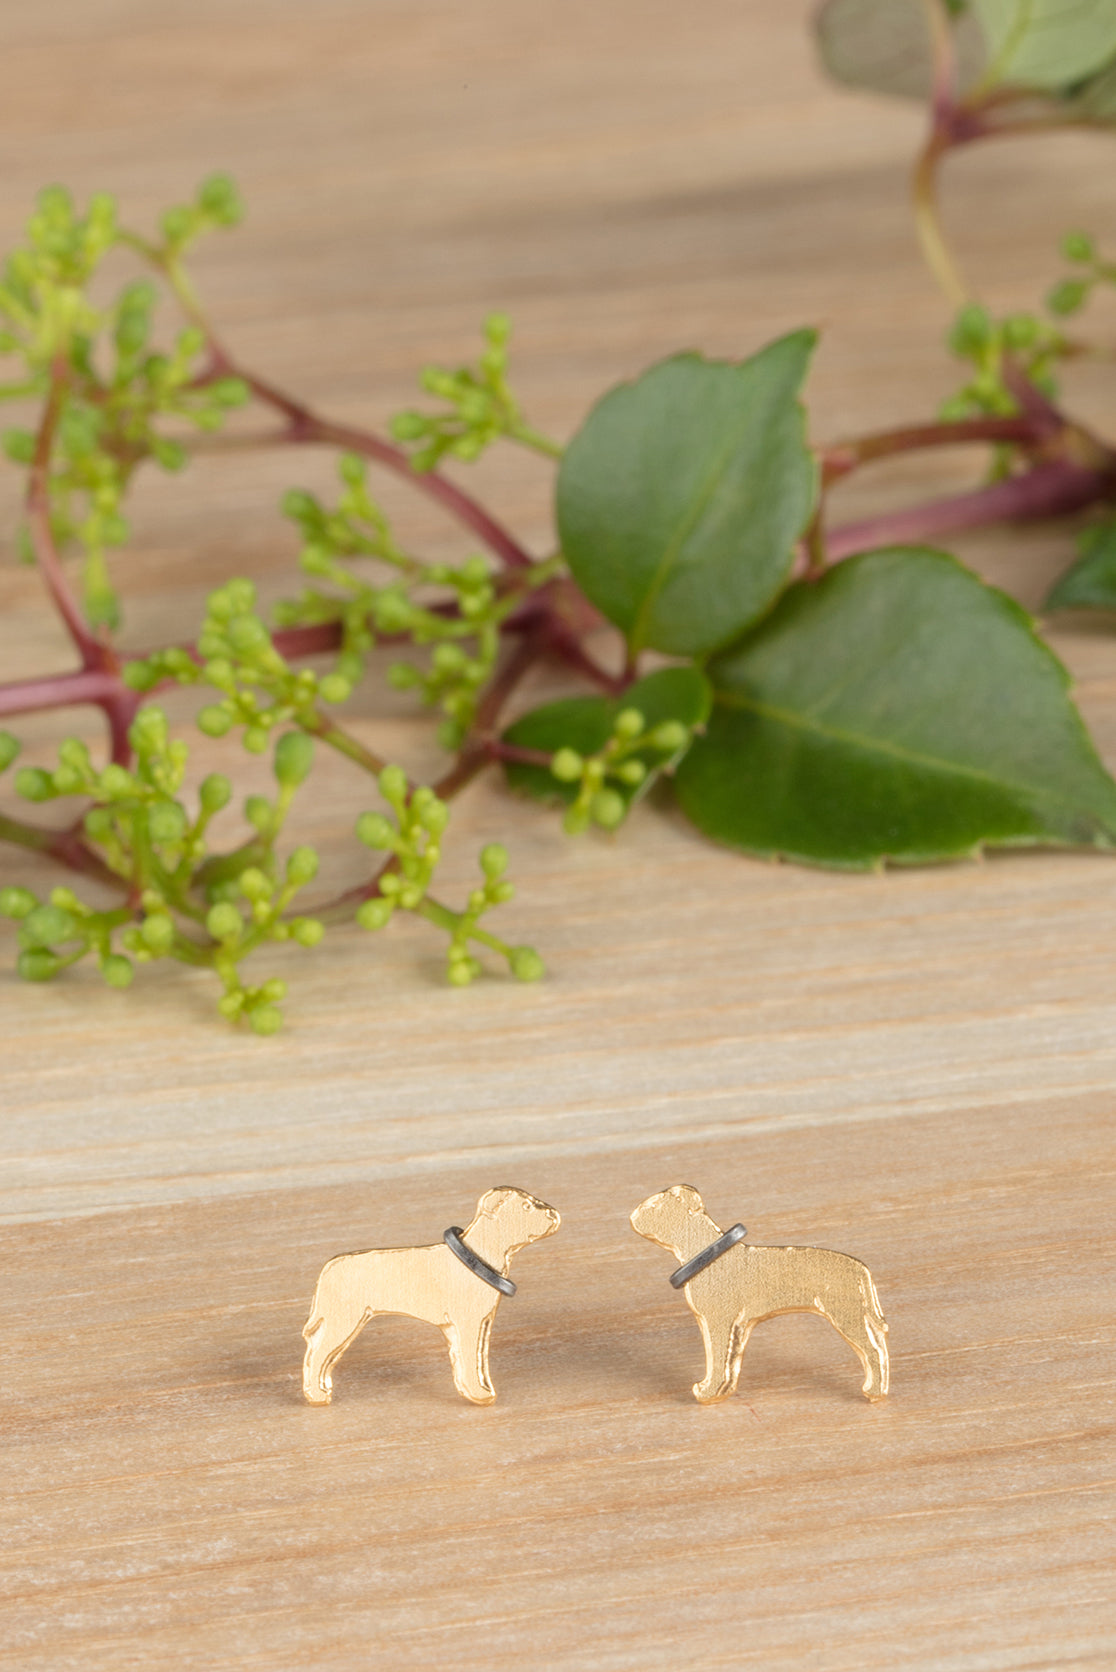 Handmade 22ct gold dog earrings on a wooden surface